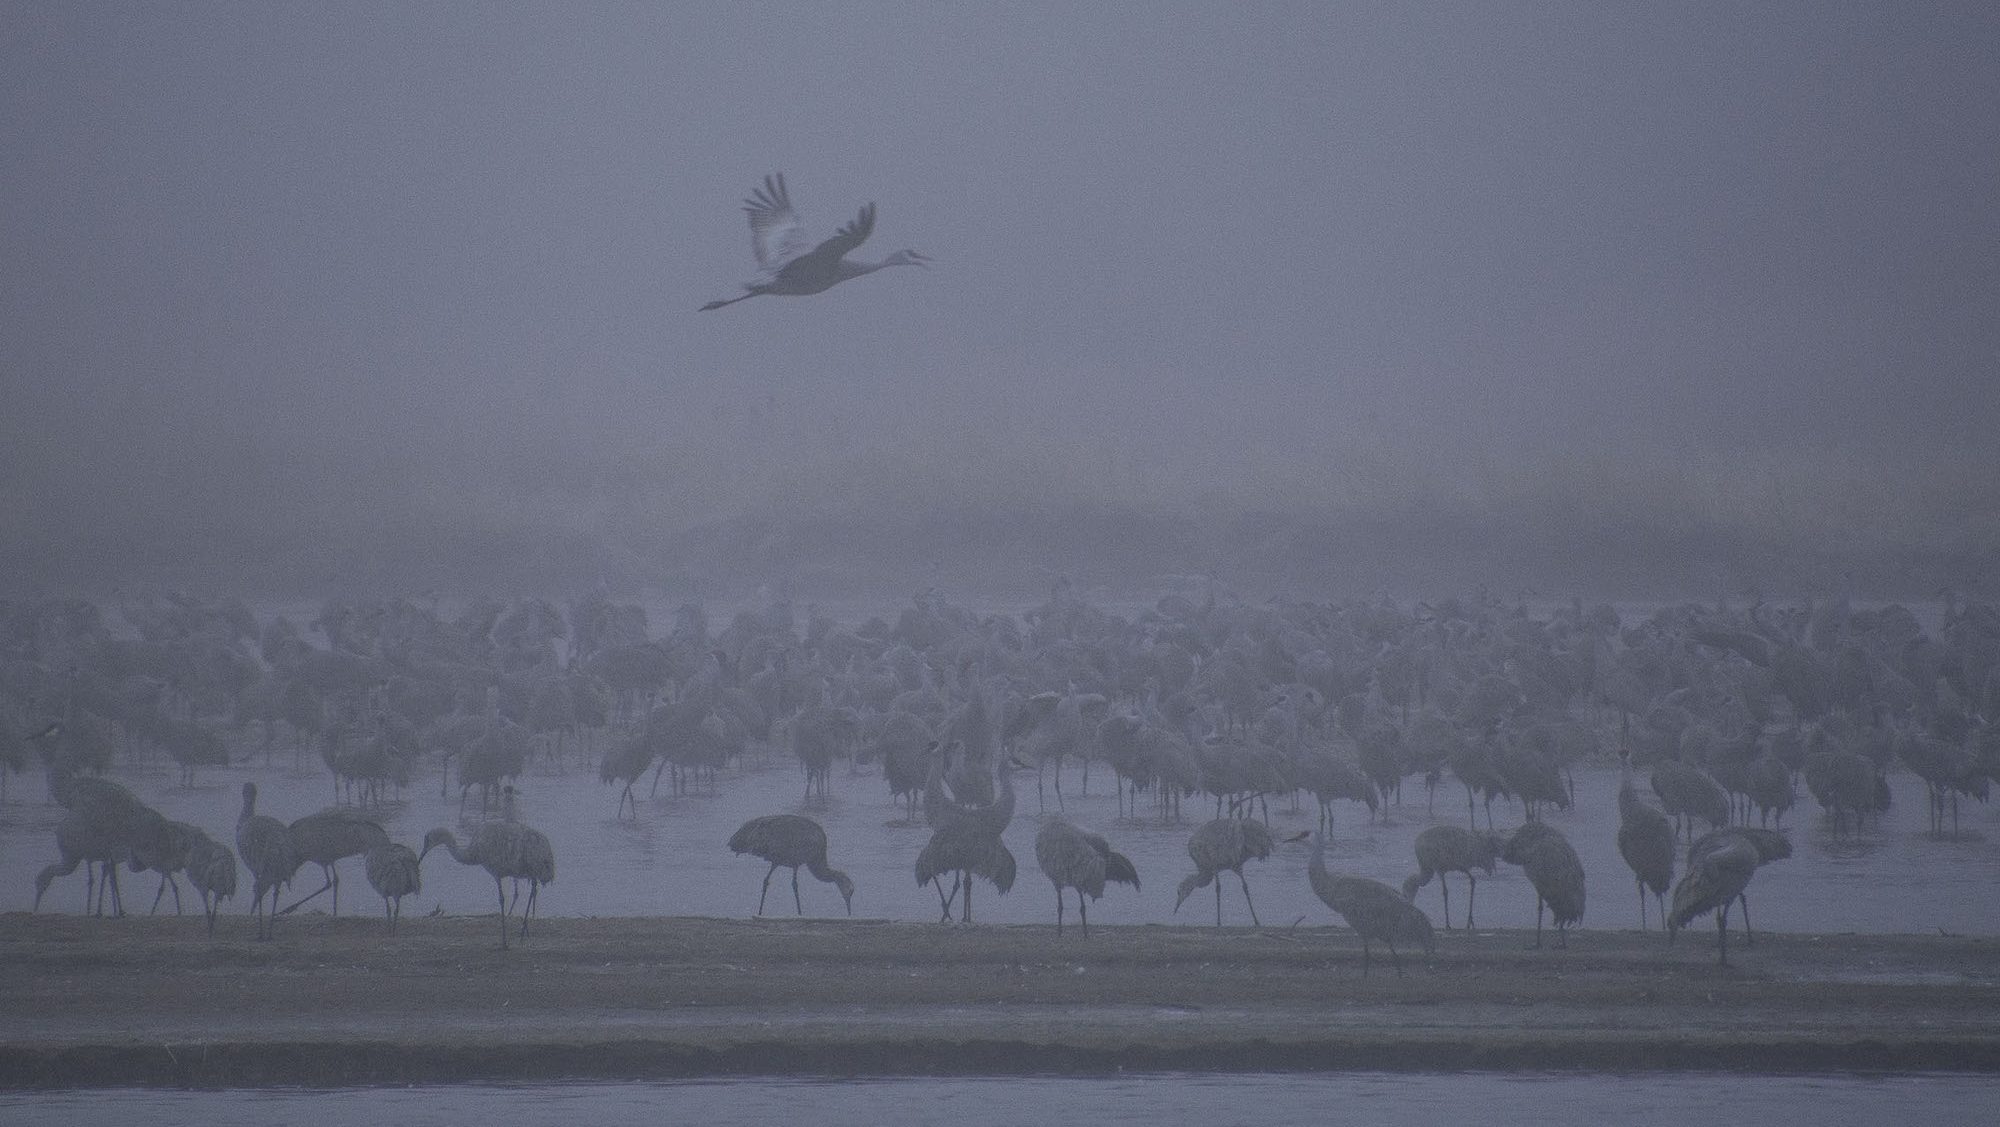 birds wading in a shallow river amid mist